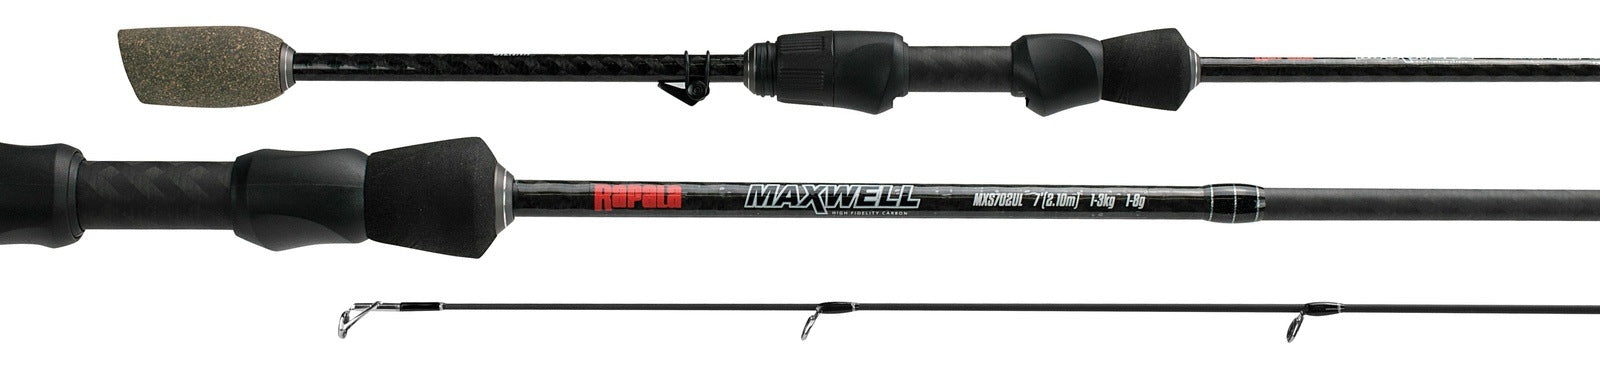 Rapala Maxwell 6'8 2pc Medium Light Casting Rod CLEARANCE — Bait Master  Fishing and Tackle